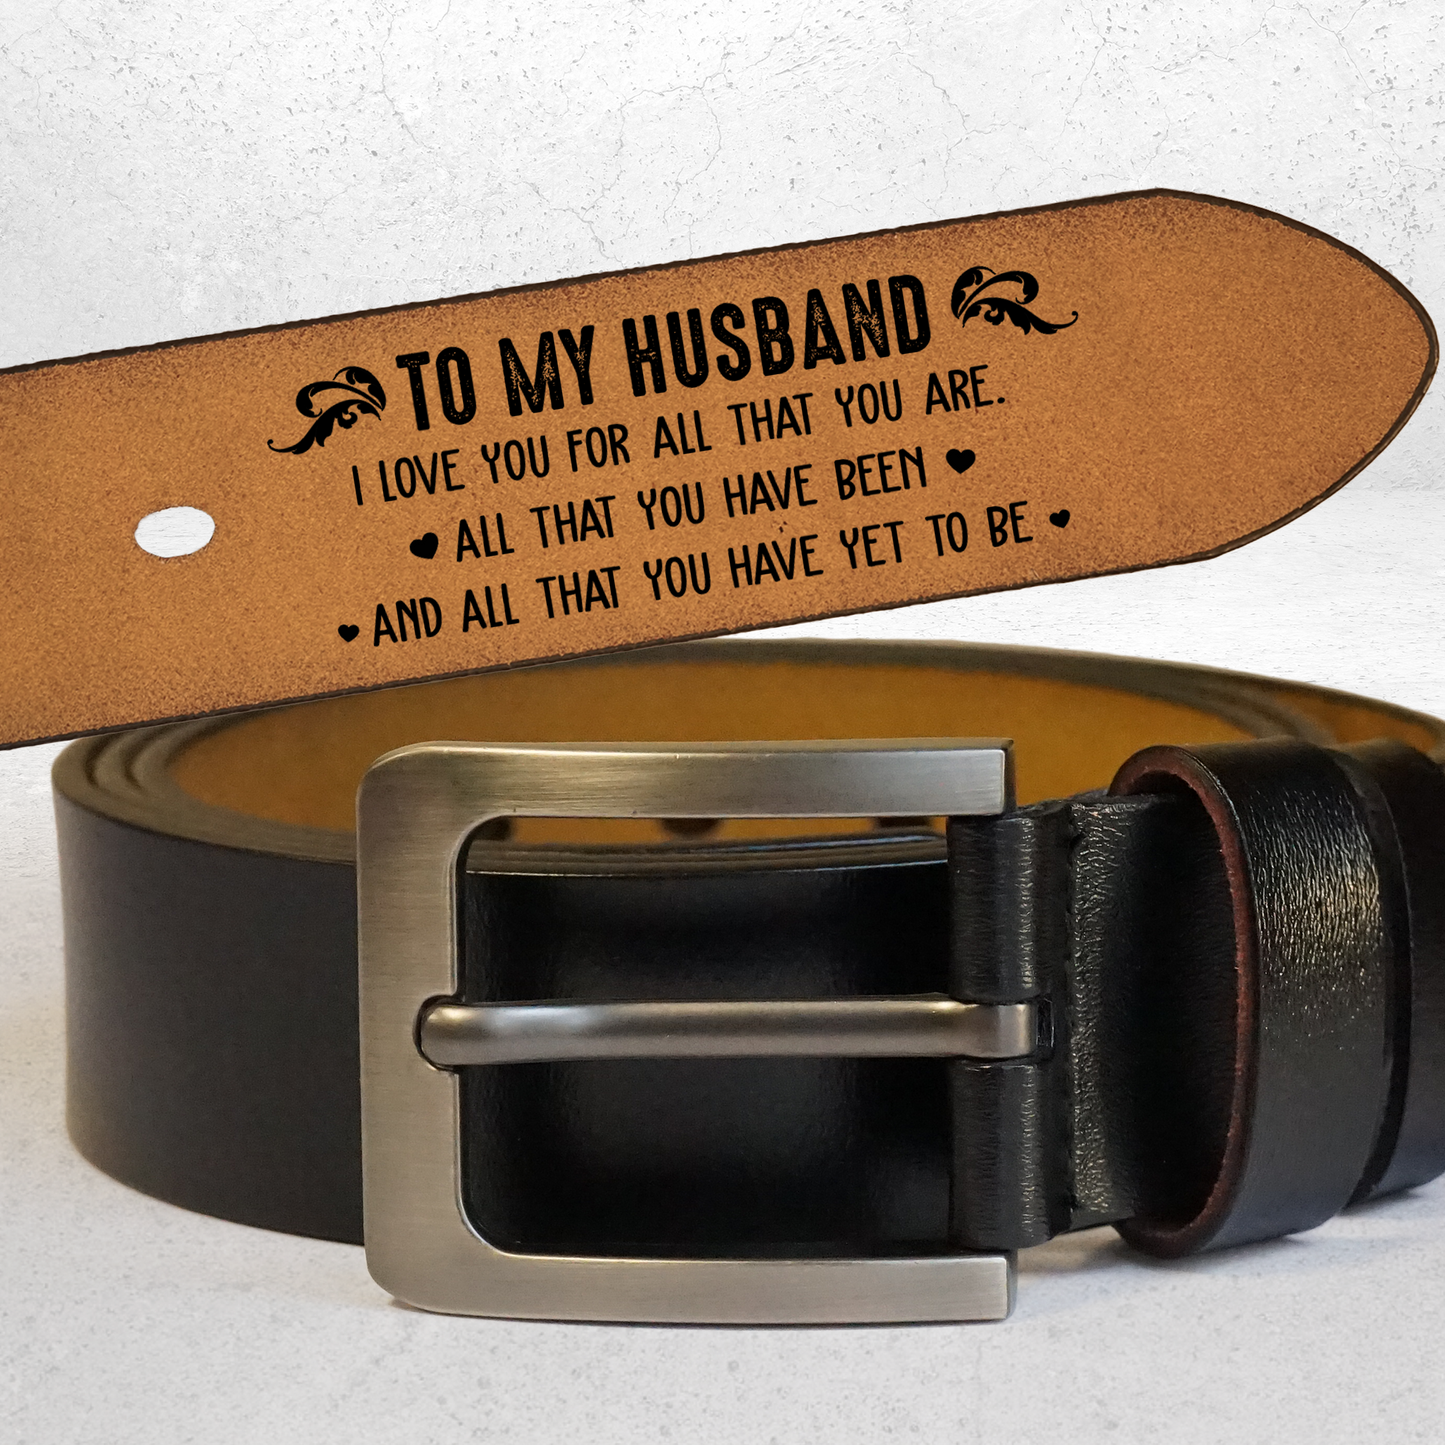 I Love You For All That You Are - Personalized Engraved Leather Belt